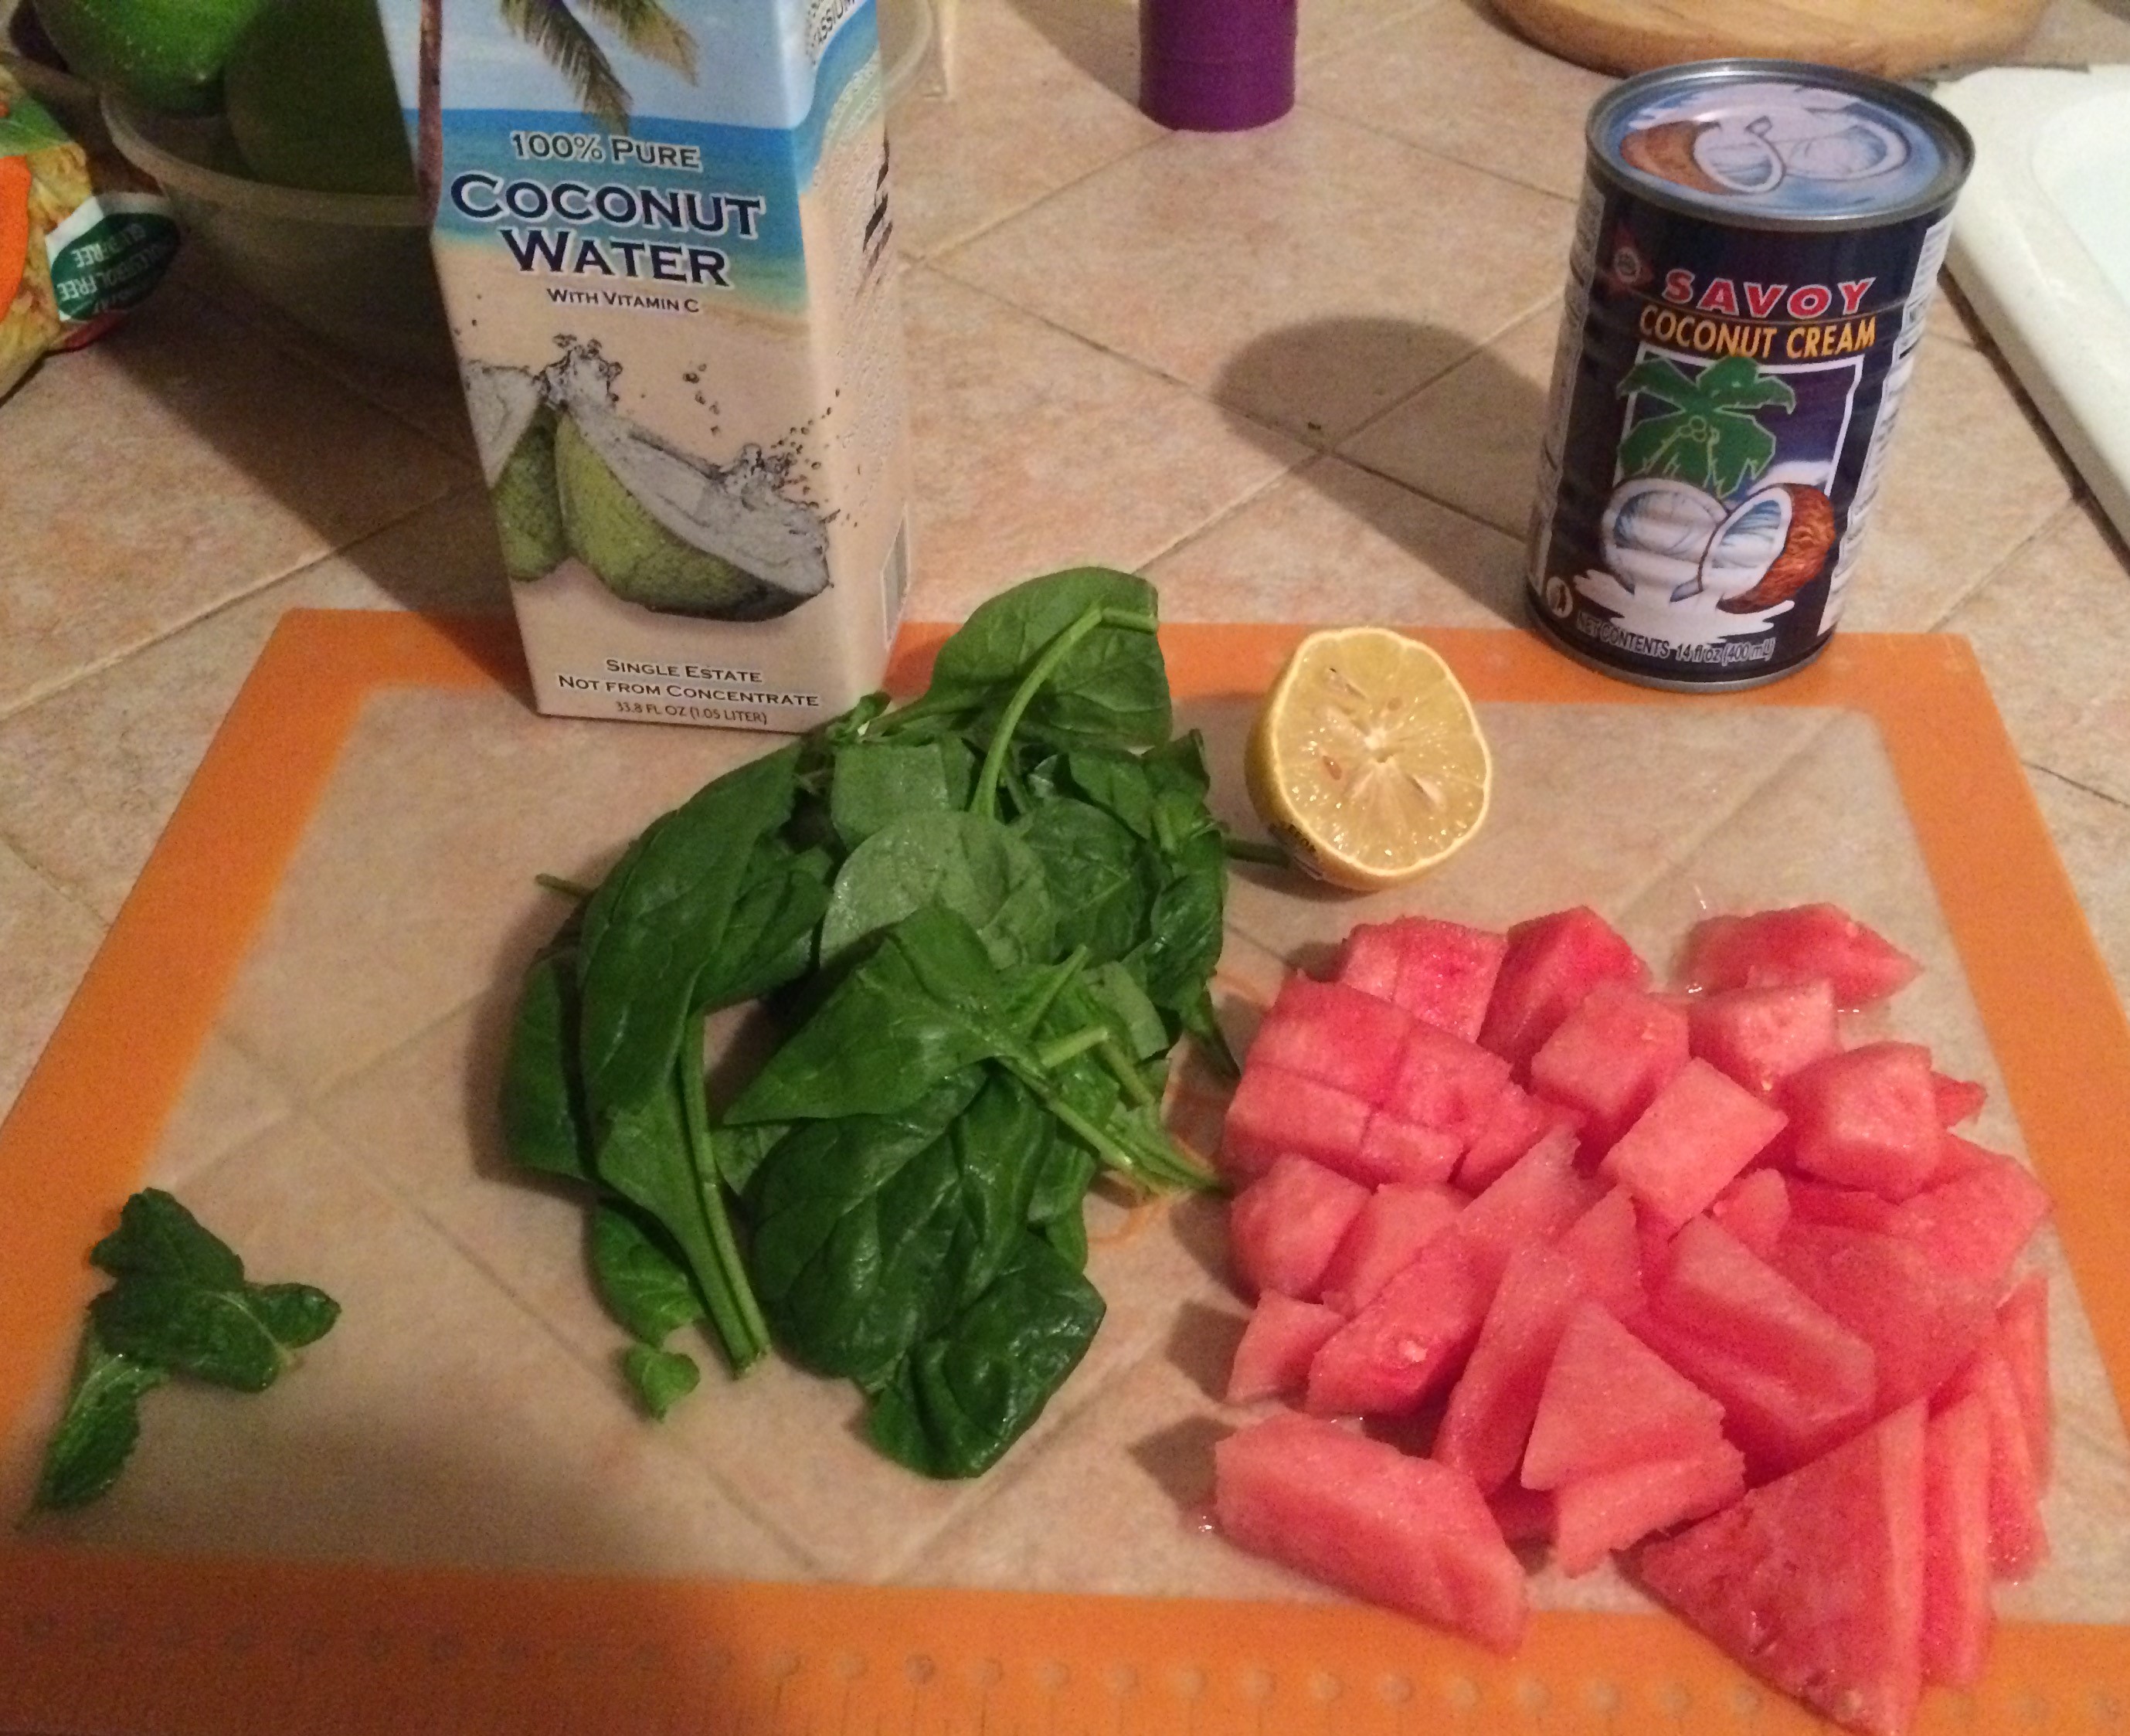 Ingredients for this one are watermelon, spinach, lemon, mint, coconut water, and coconut cream.